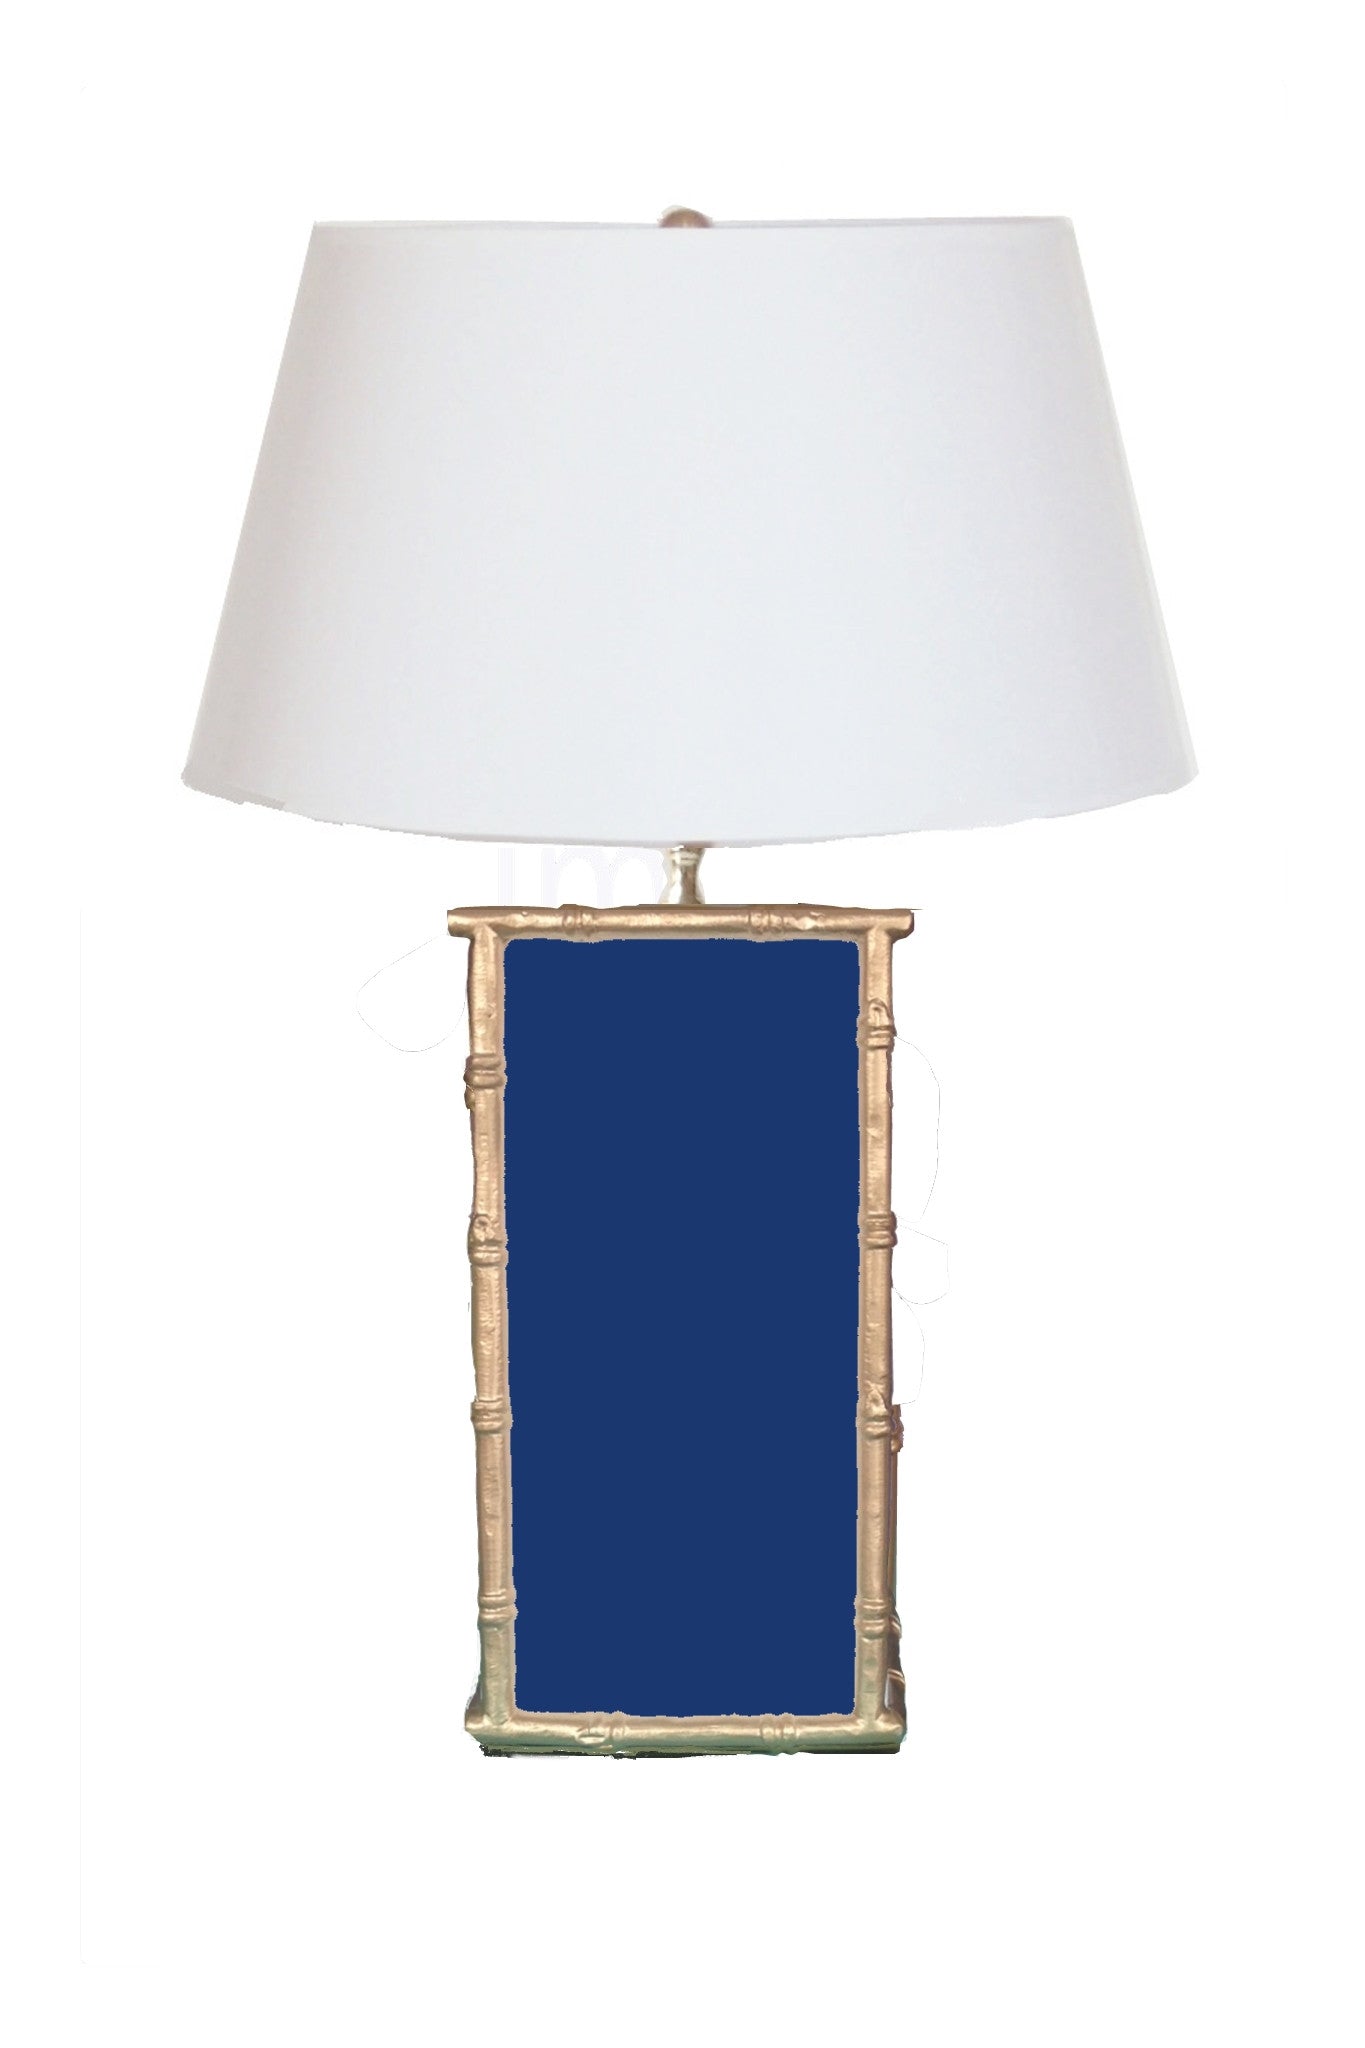 Bamboo in Navy Lamp by Dana Gibson, 2Q